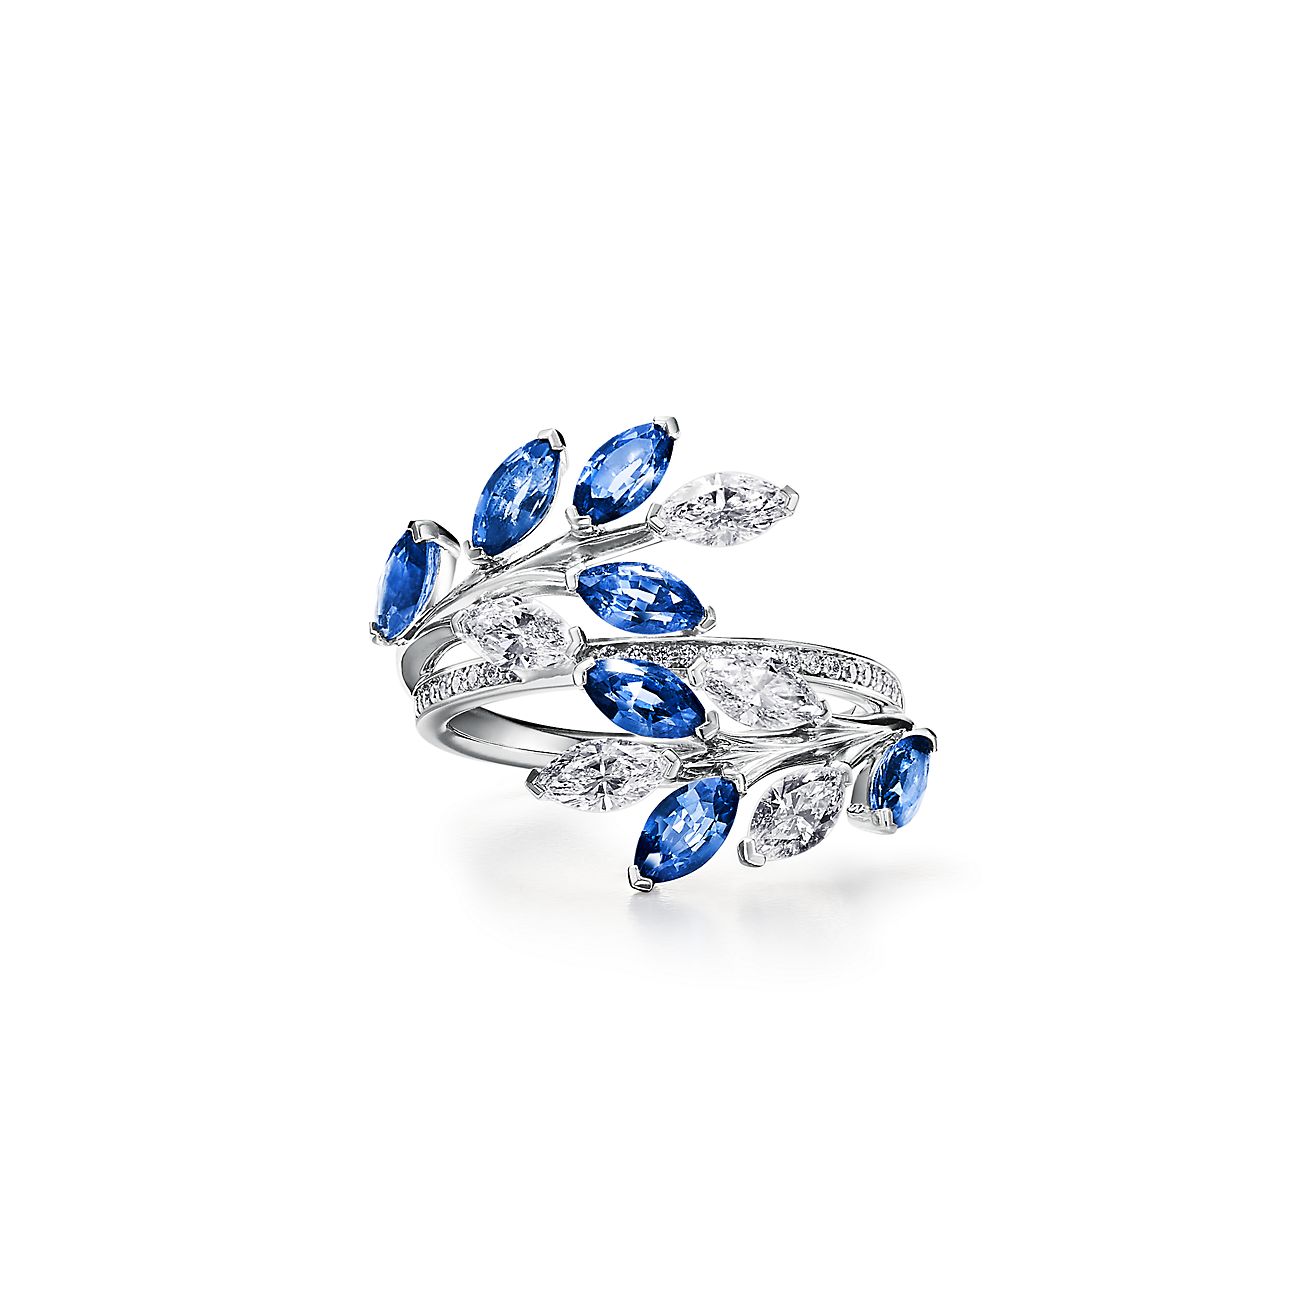 Tiffany Victoria® vine bypass ring in platinum with sapphires and diamonds.  | Tiffany & Co.